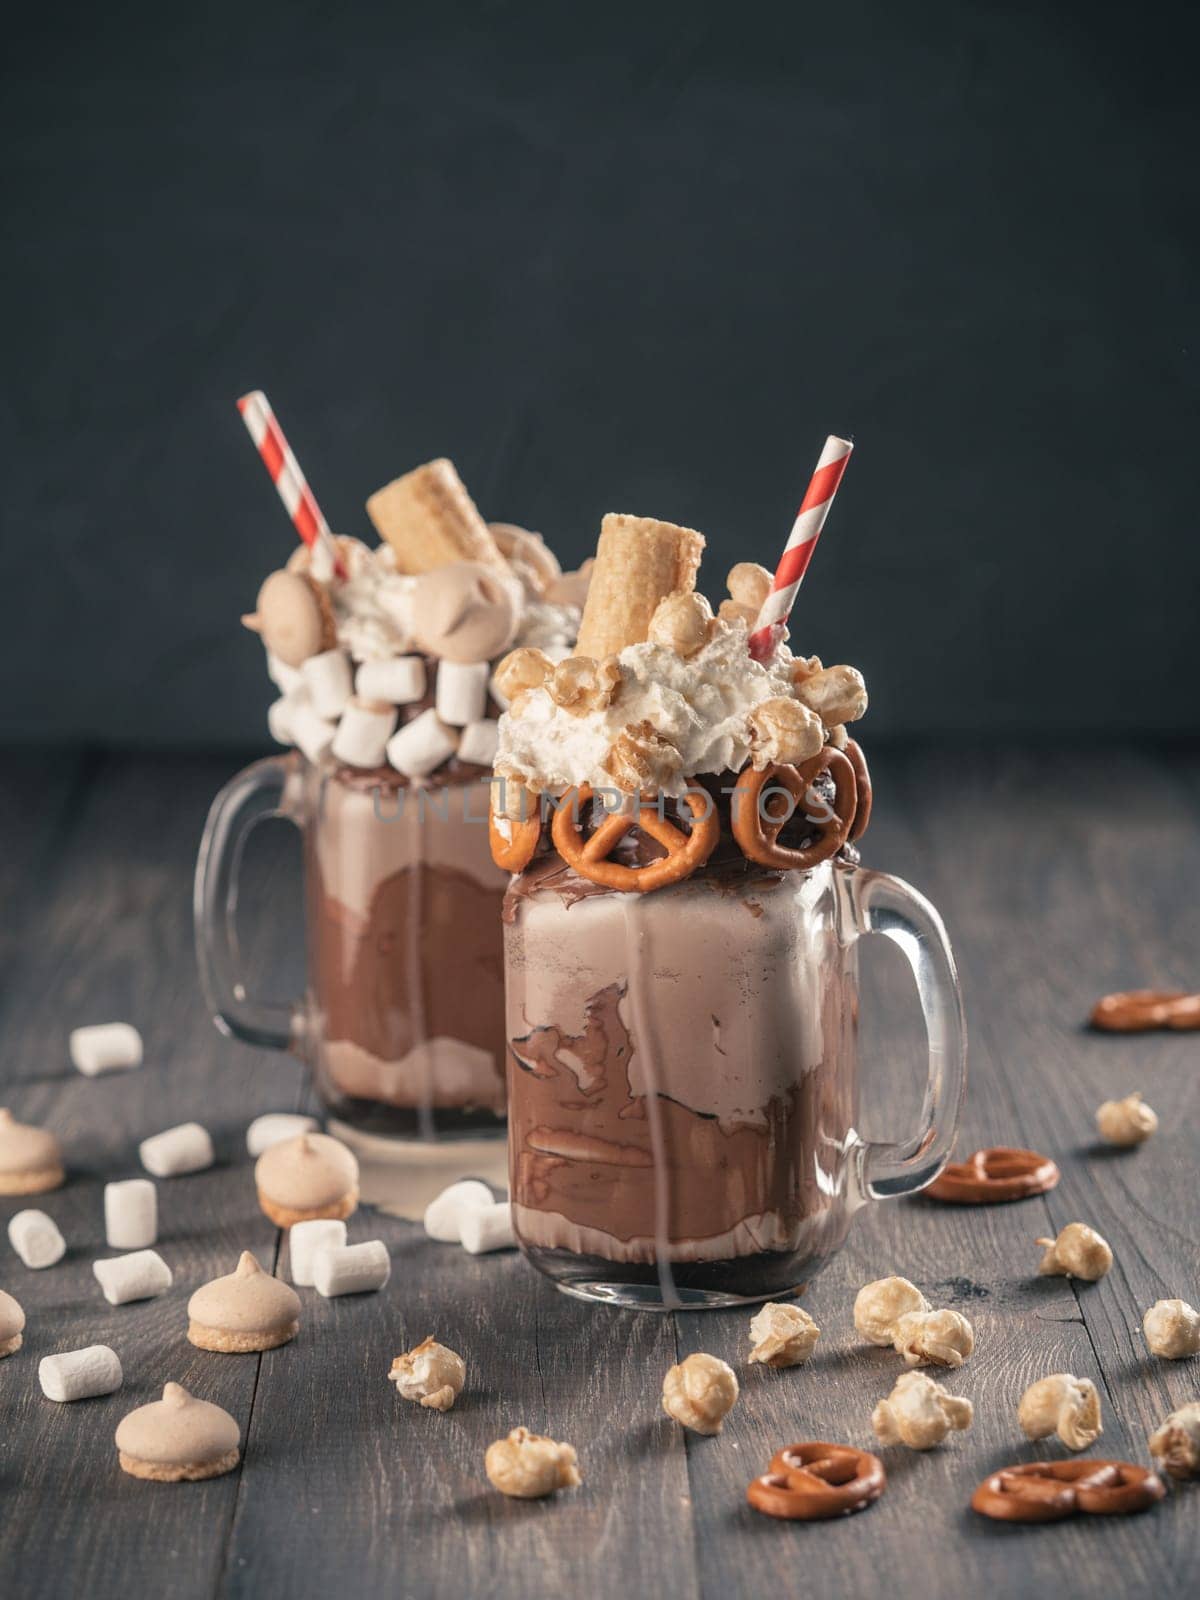 Close up view of two freakshake in mason jar on brown table. Freaked milkshake with chocolate, pretzel, marshmallow, popcorn and waffles. Trendy food concept. Vertical. Copy space.